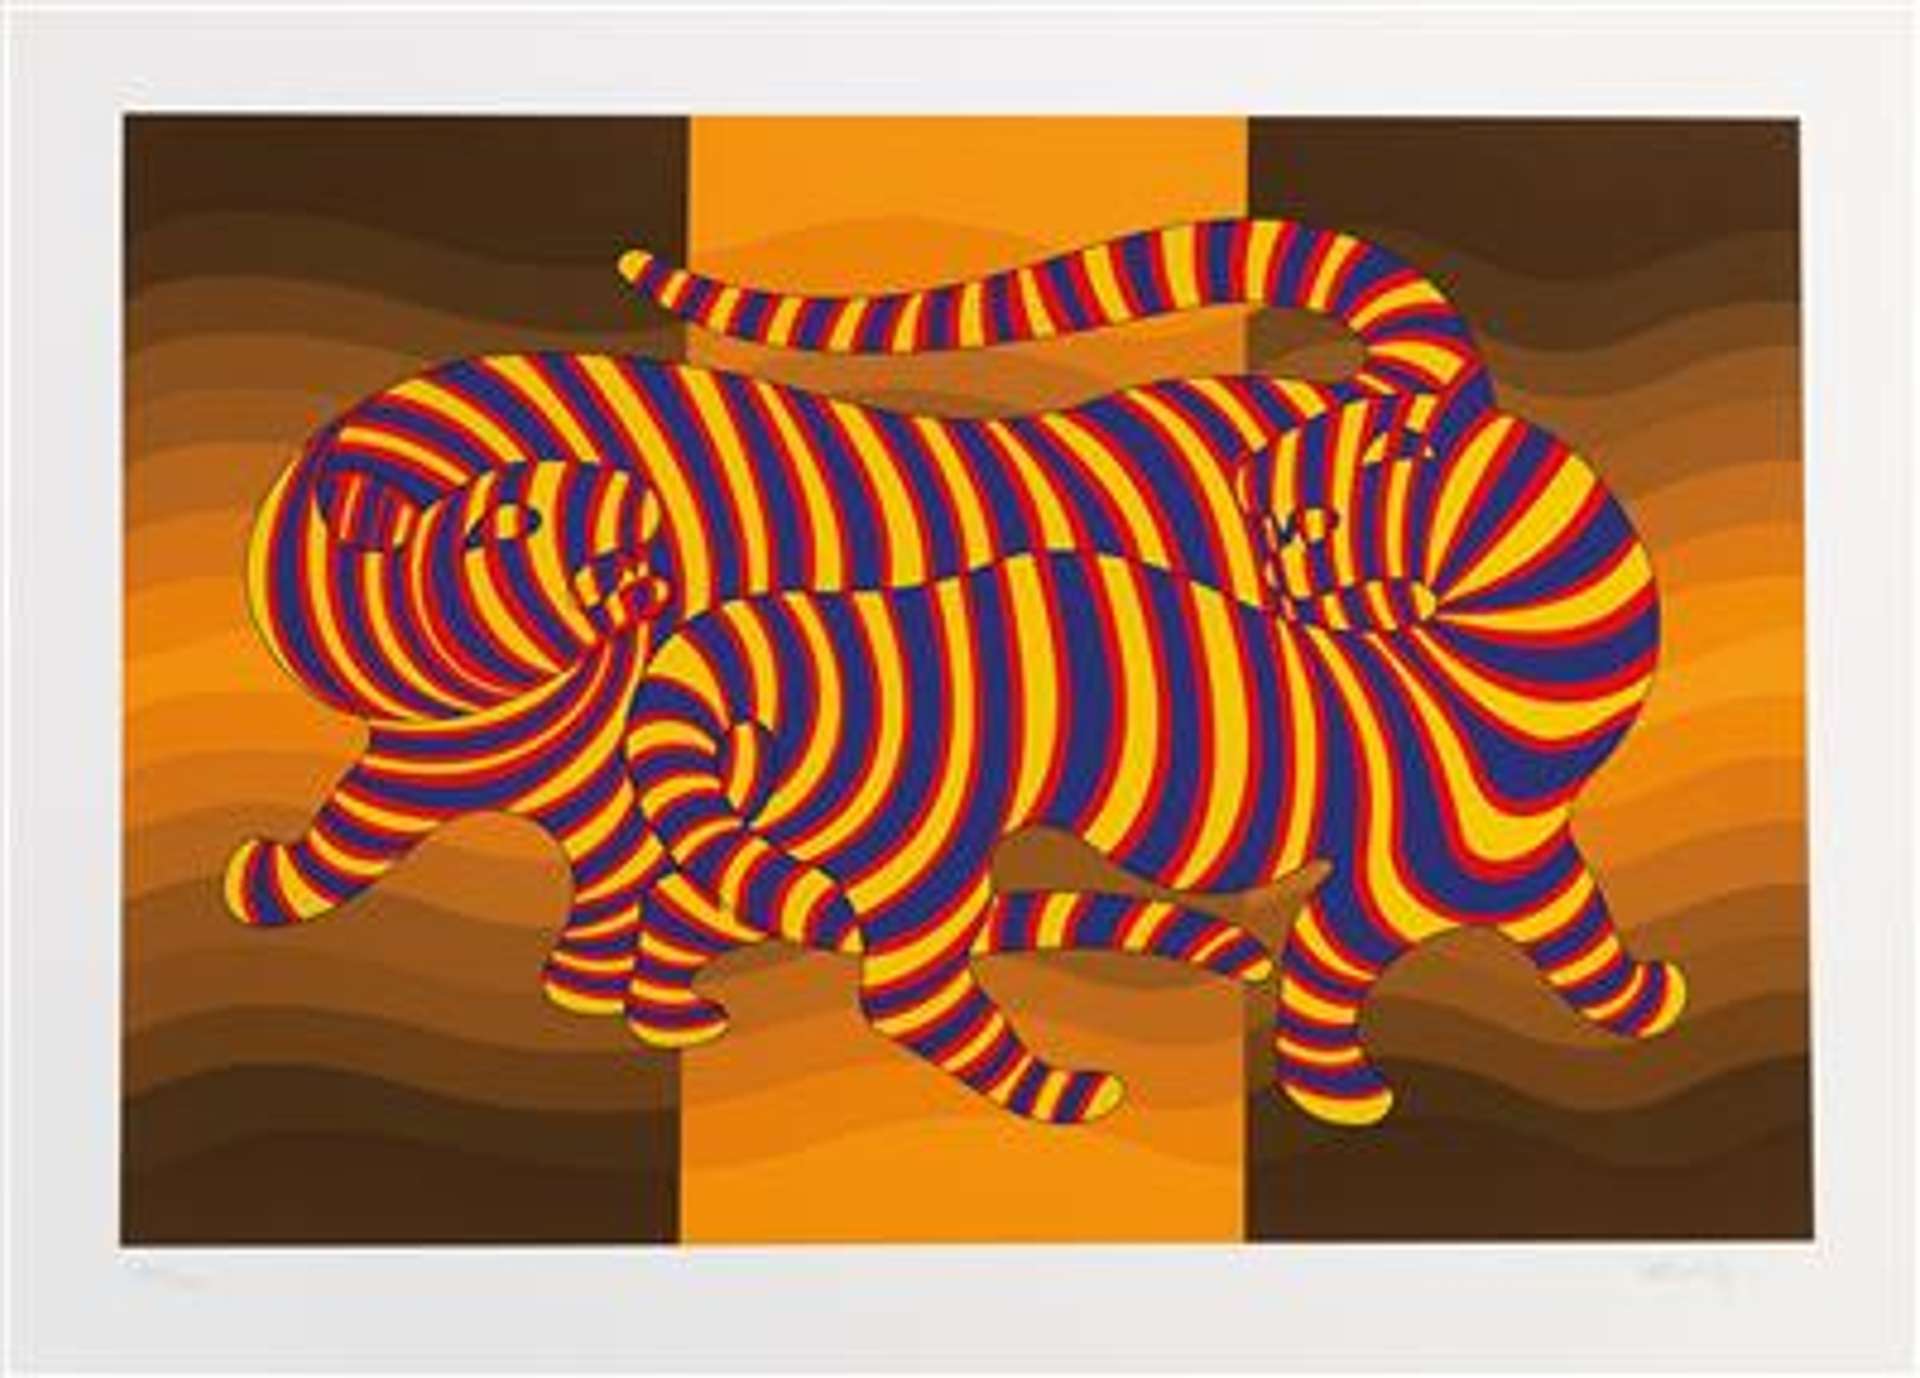 Two Tigers (orange) by Víctor Vasarely (1980). The artwork features two tigers in the centre of the composition, intertwined, on a background comprising three vertical stripes in black and orange.